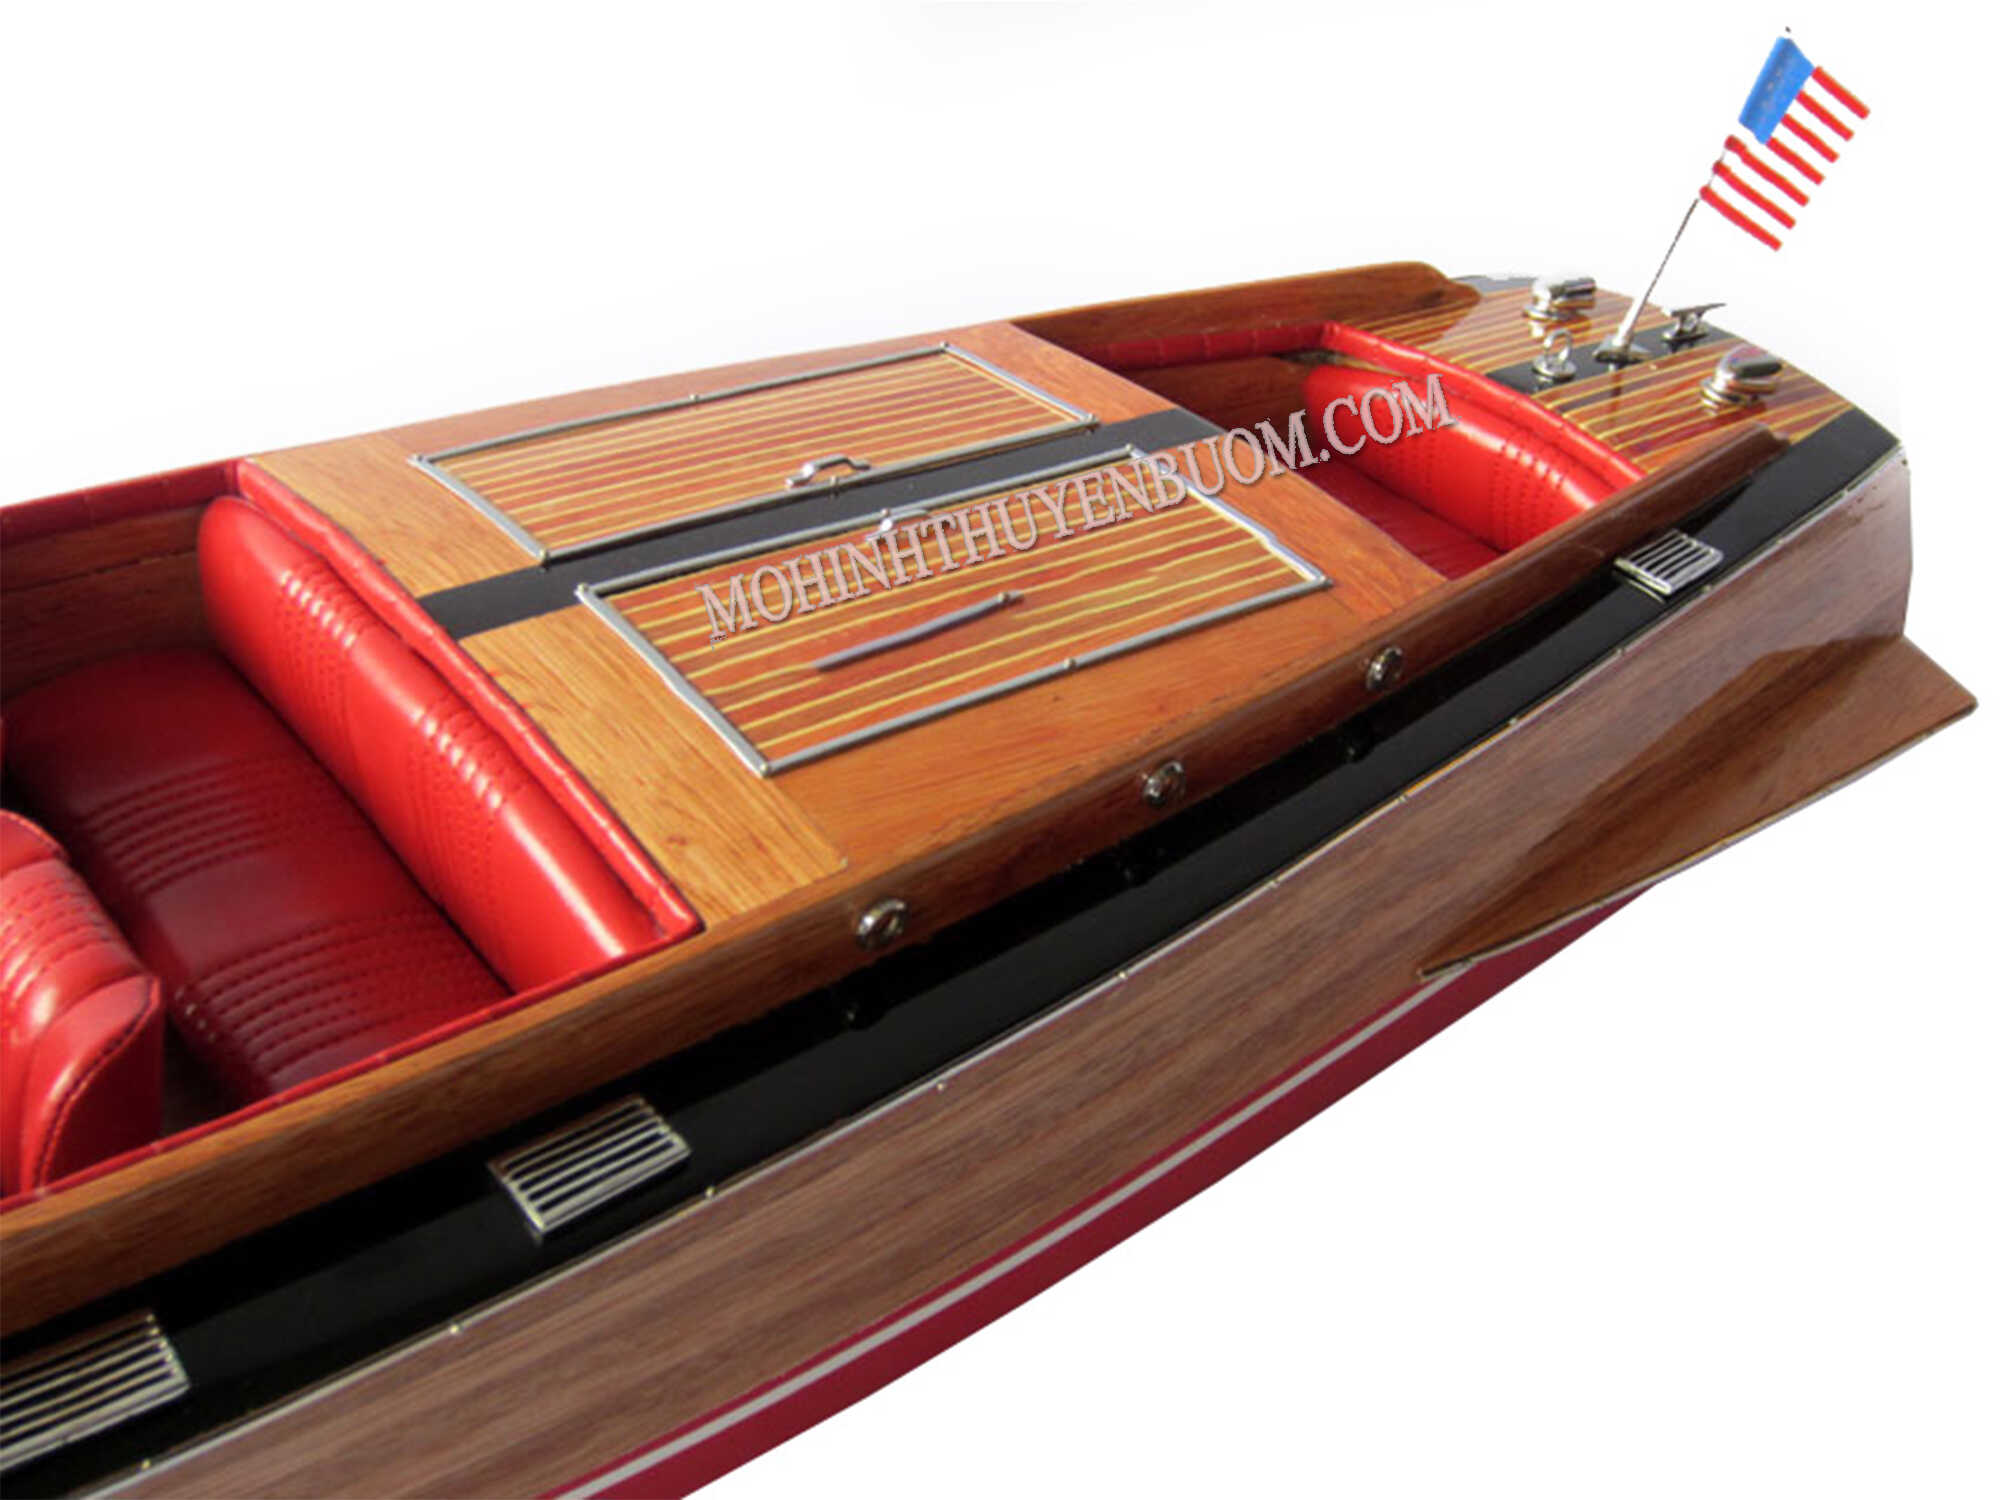 Chris Craft Runabout Classic Boat Model